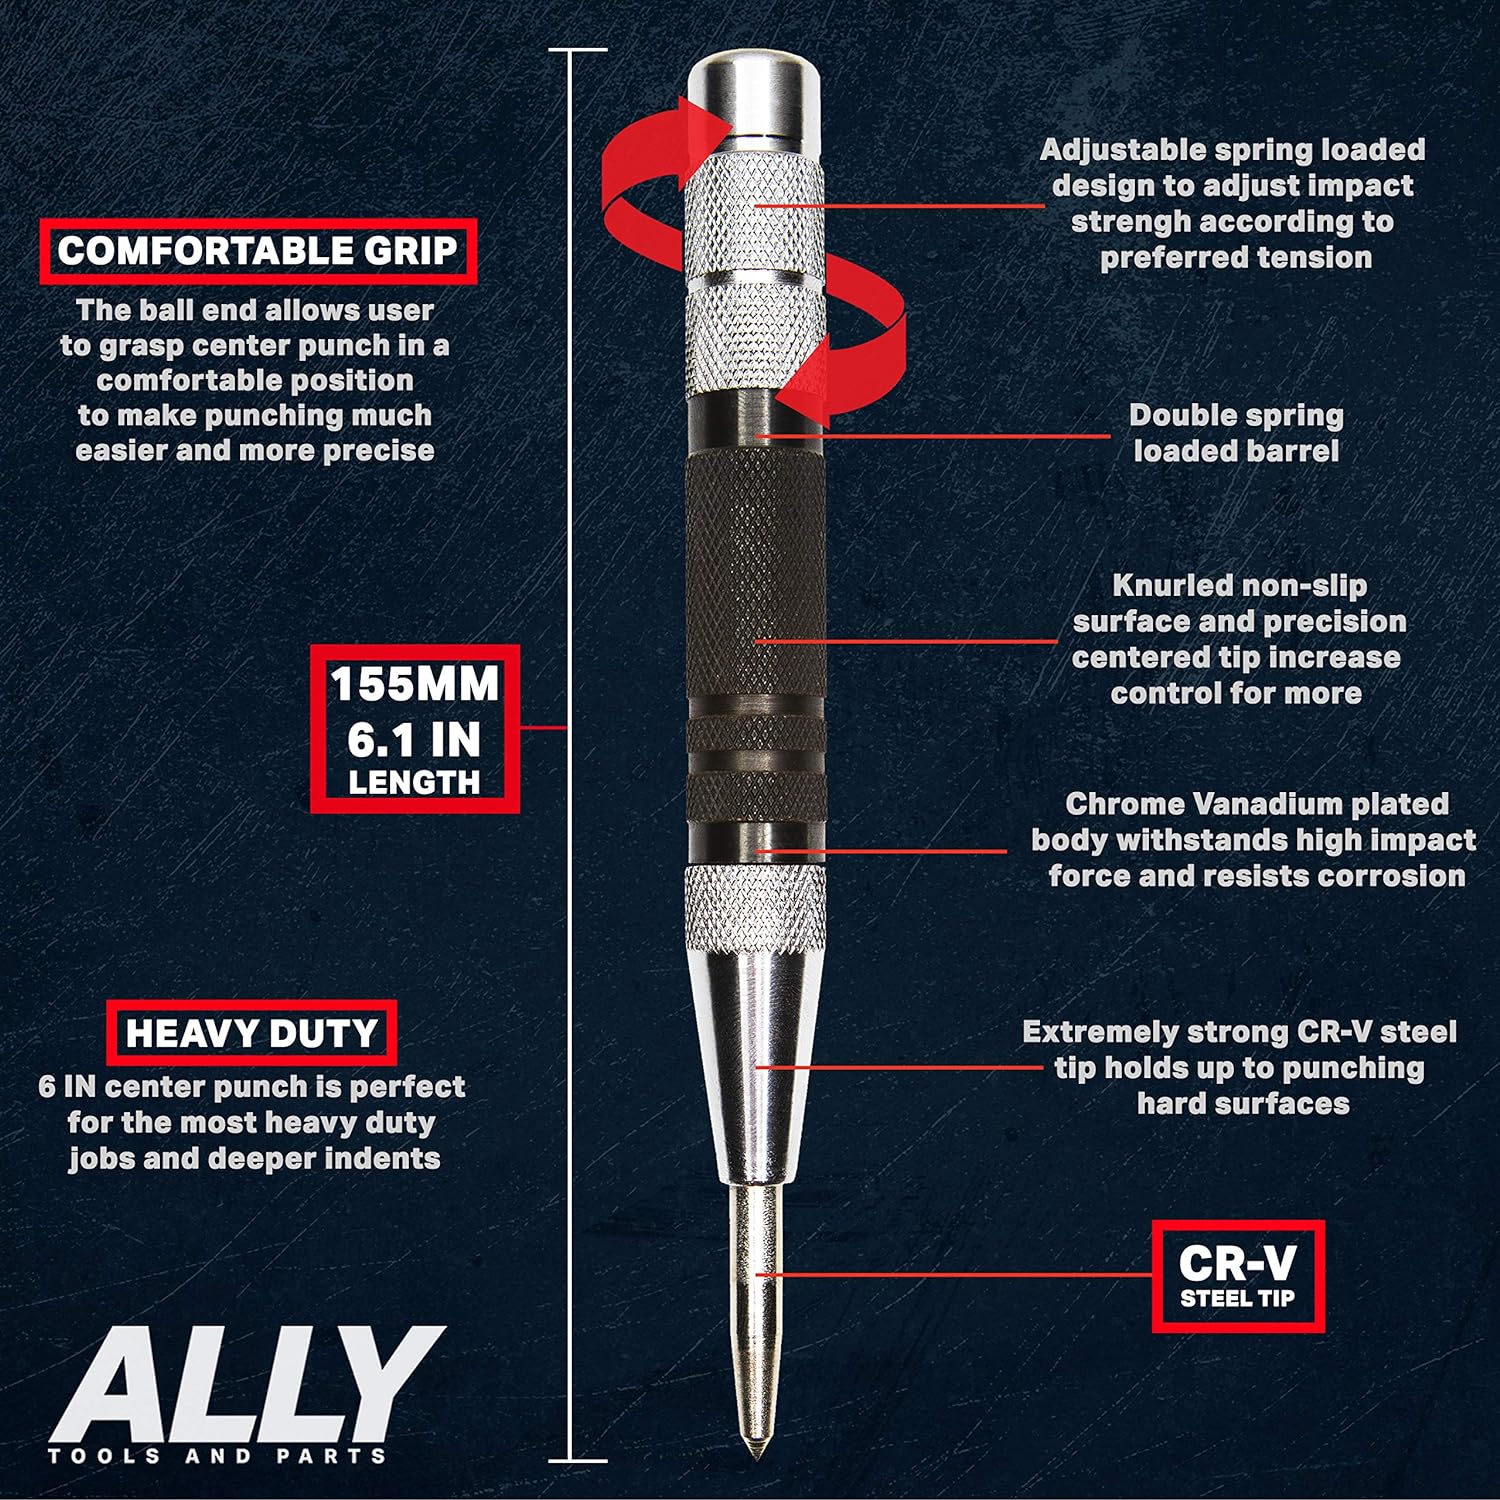 ALLY Tools and Parts Corp. ALLY Tools Super Strong 3 PC SET of 6 Inch Heavy Duty Automatic Center Punch, Perfect Automatic Center Punch for Metal, Wood, P